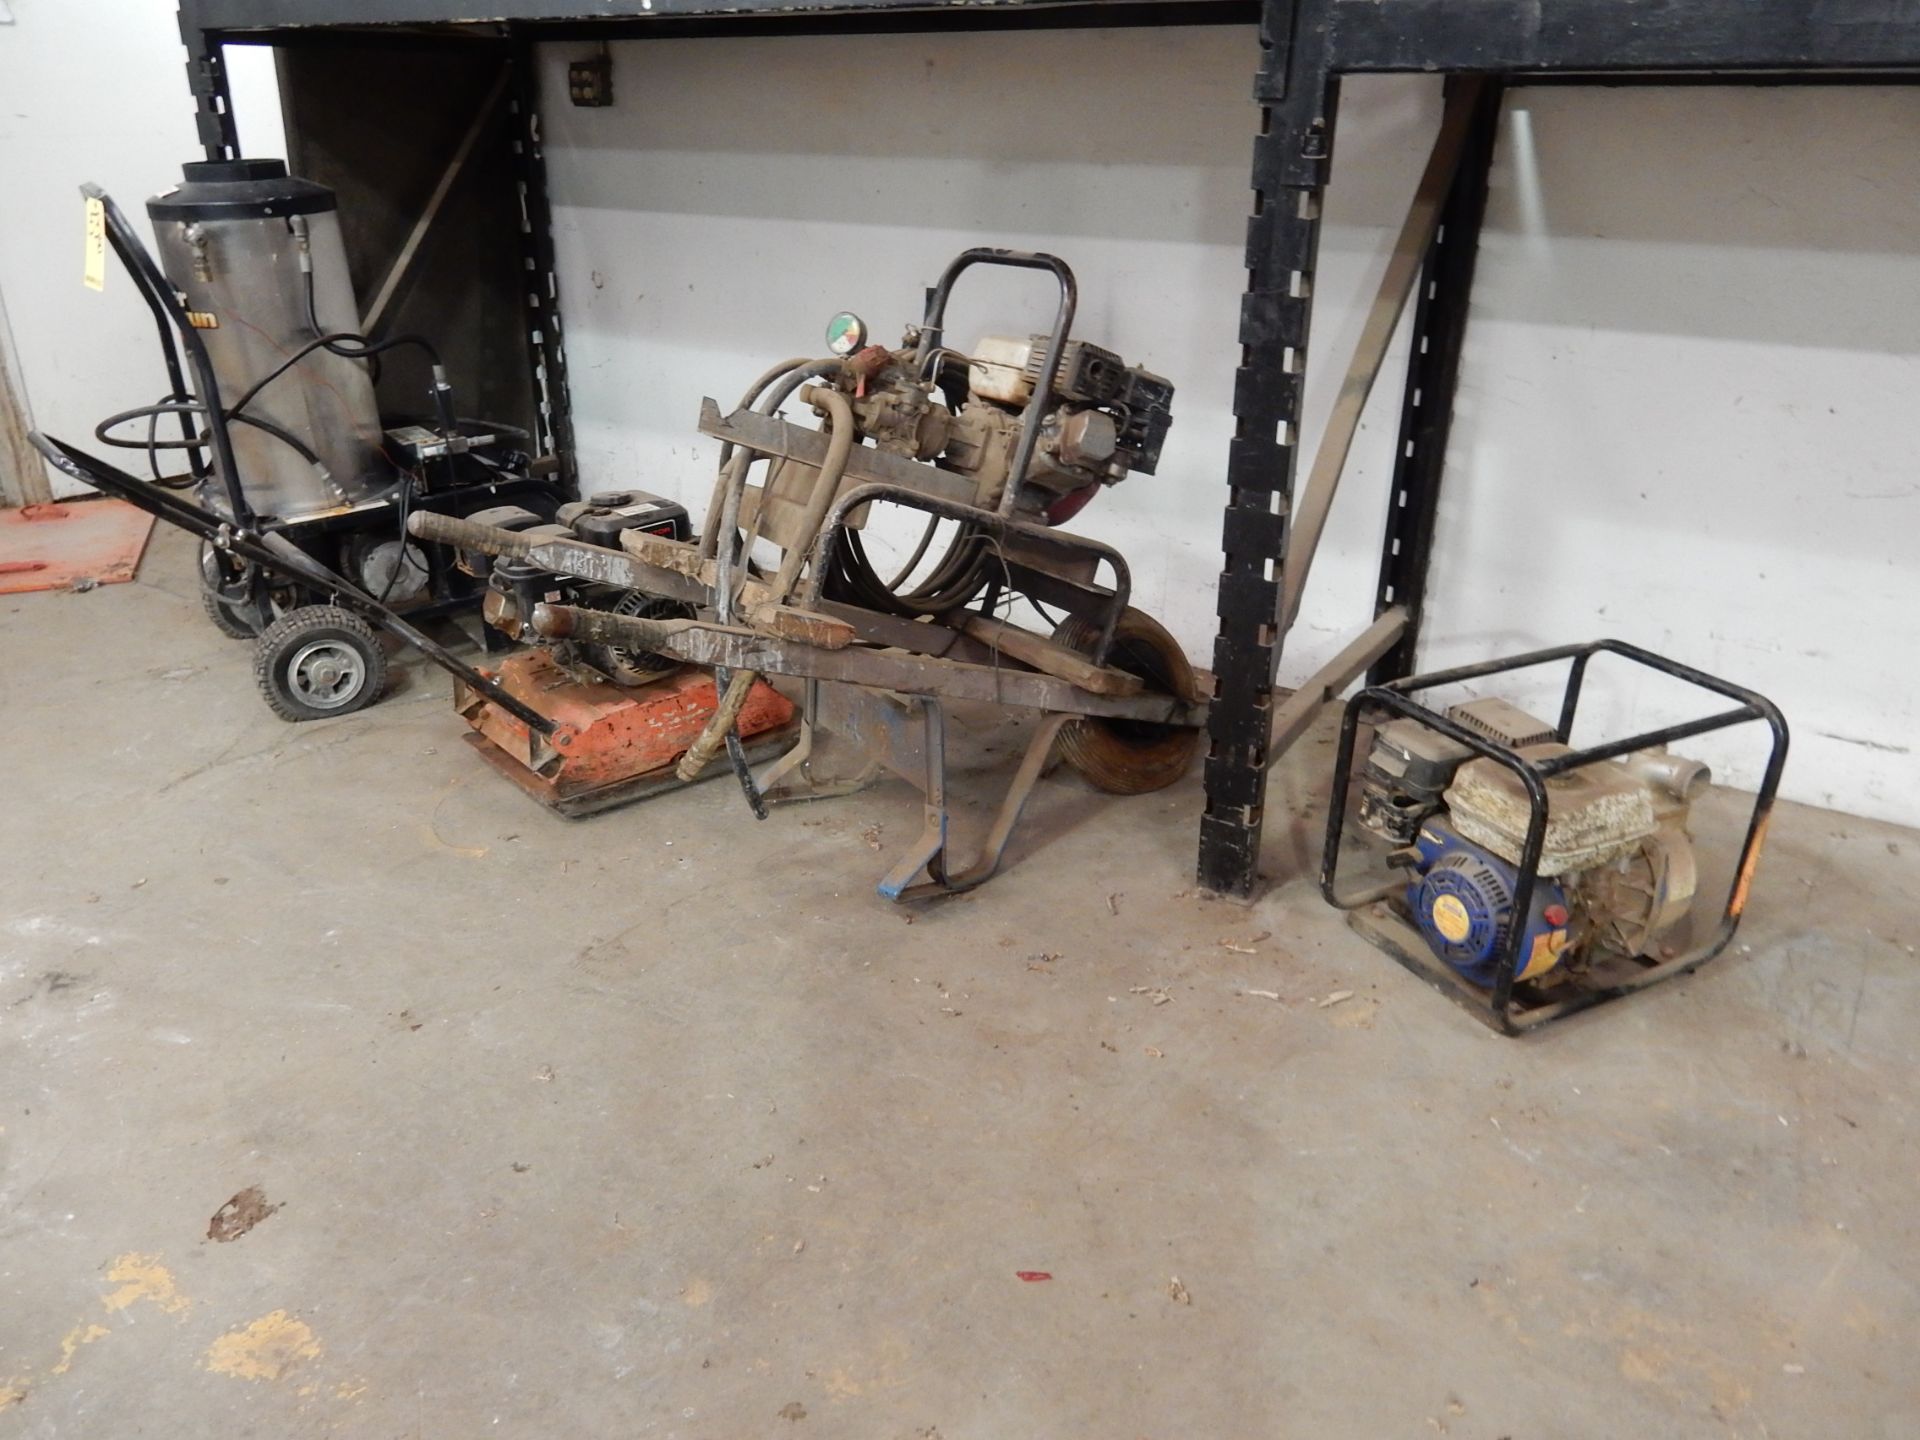 SOLD BY PHOTO - LOT, INCLUDING PORT. PRESSURE WASHER, PLATE COMPACTOR, PUMP, & GENERATOR